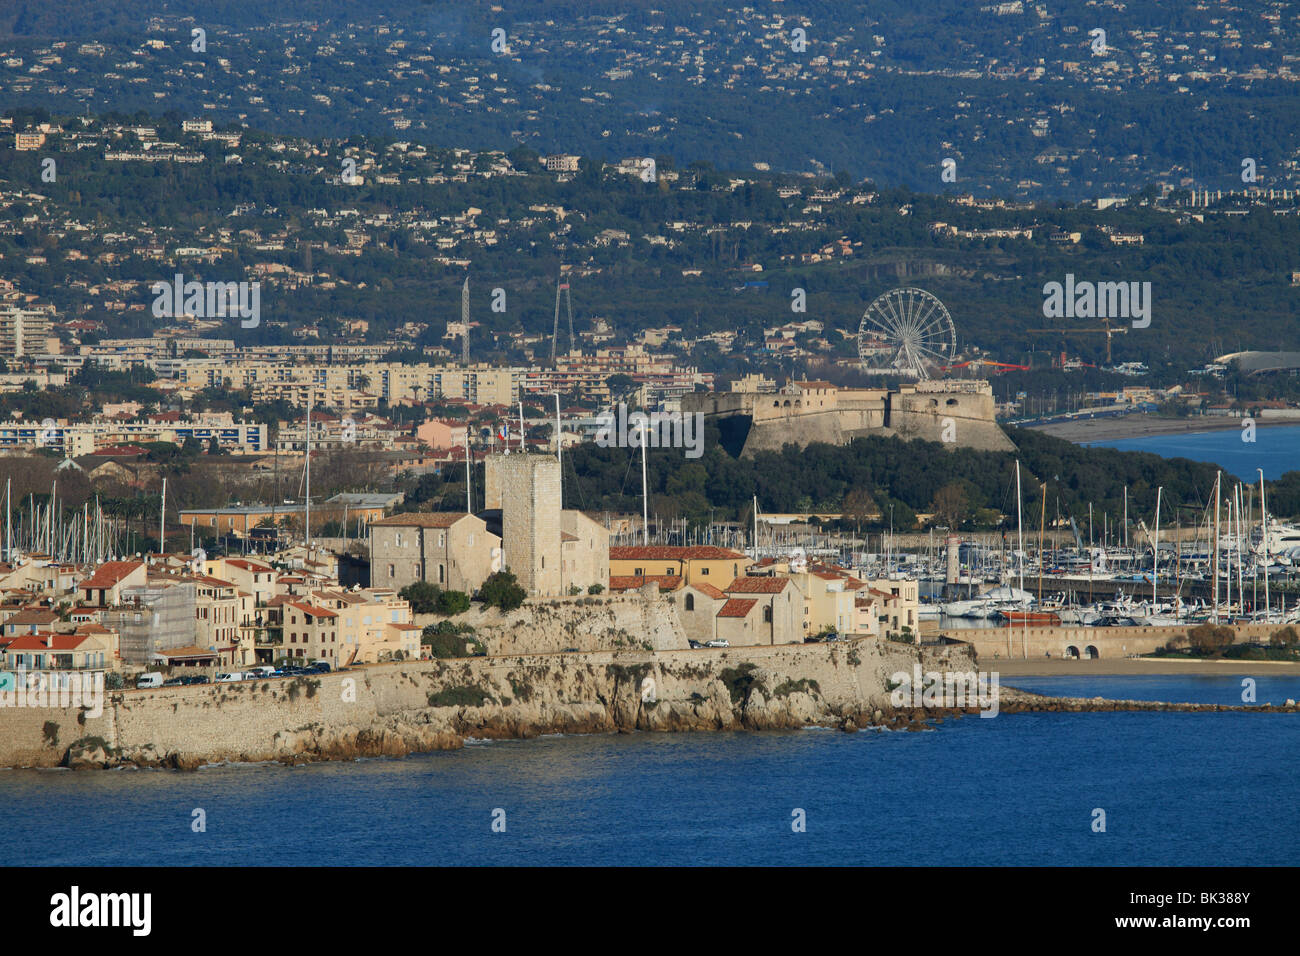 Overview of the city of Antibes and the Vauban fortress and rampart Stock Photo